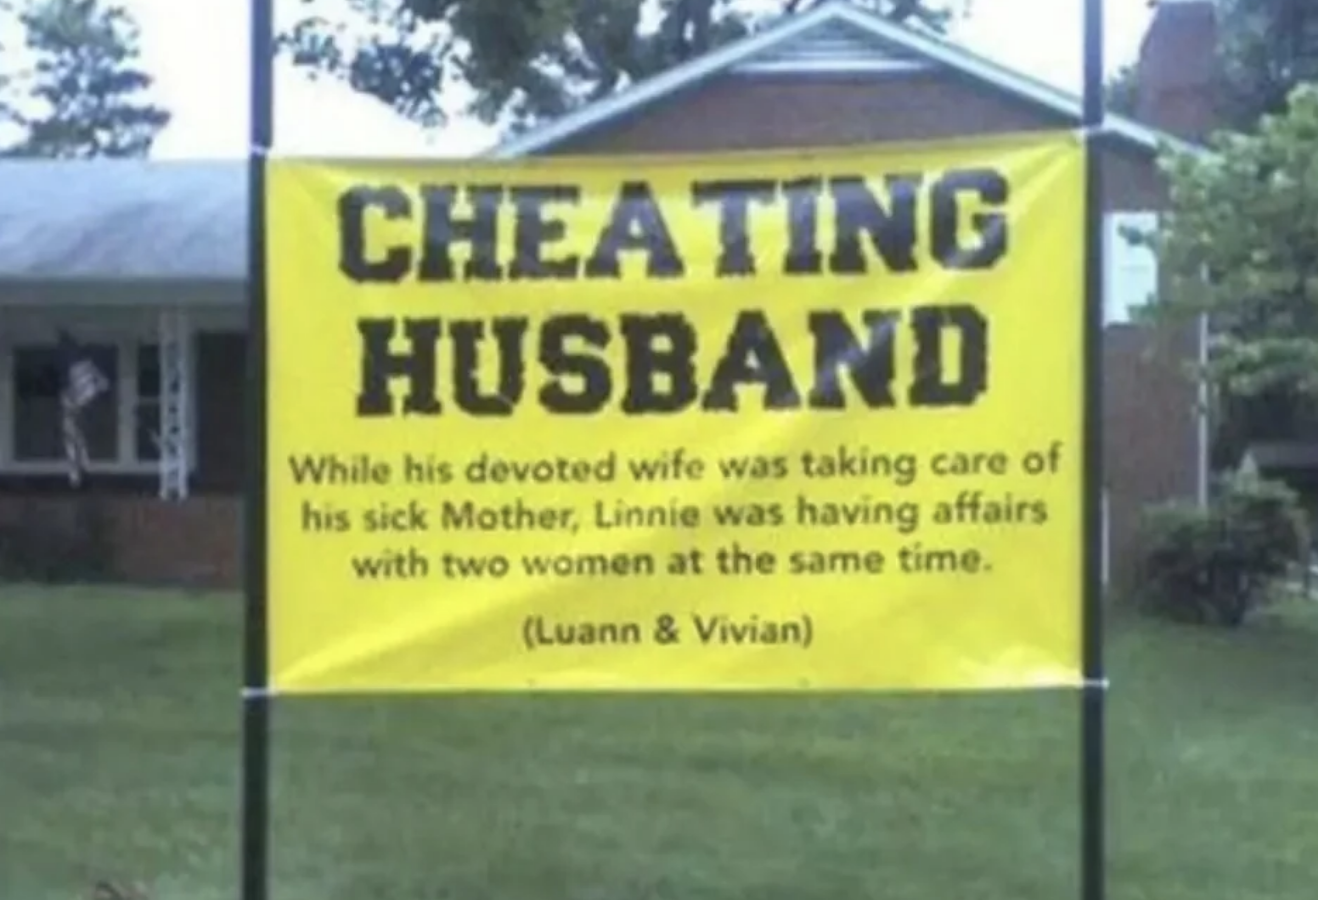 Banner accuses someone of cheating, with names and a specific scenario described. Displayed in front of a house